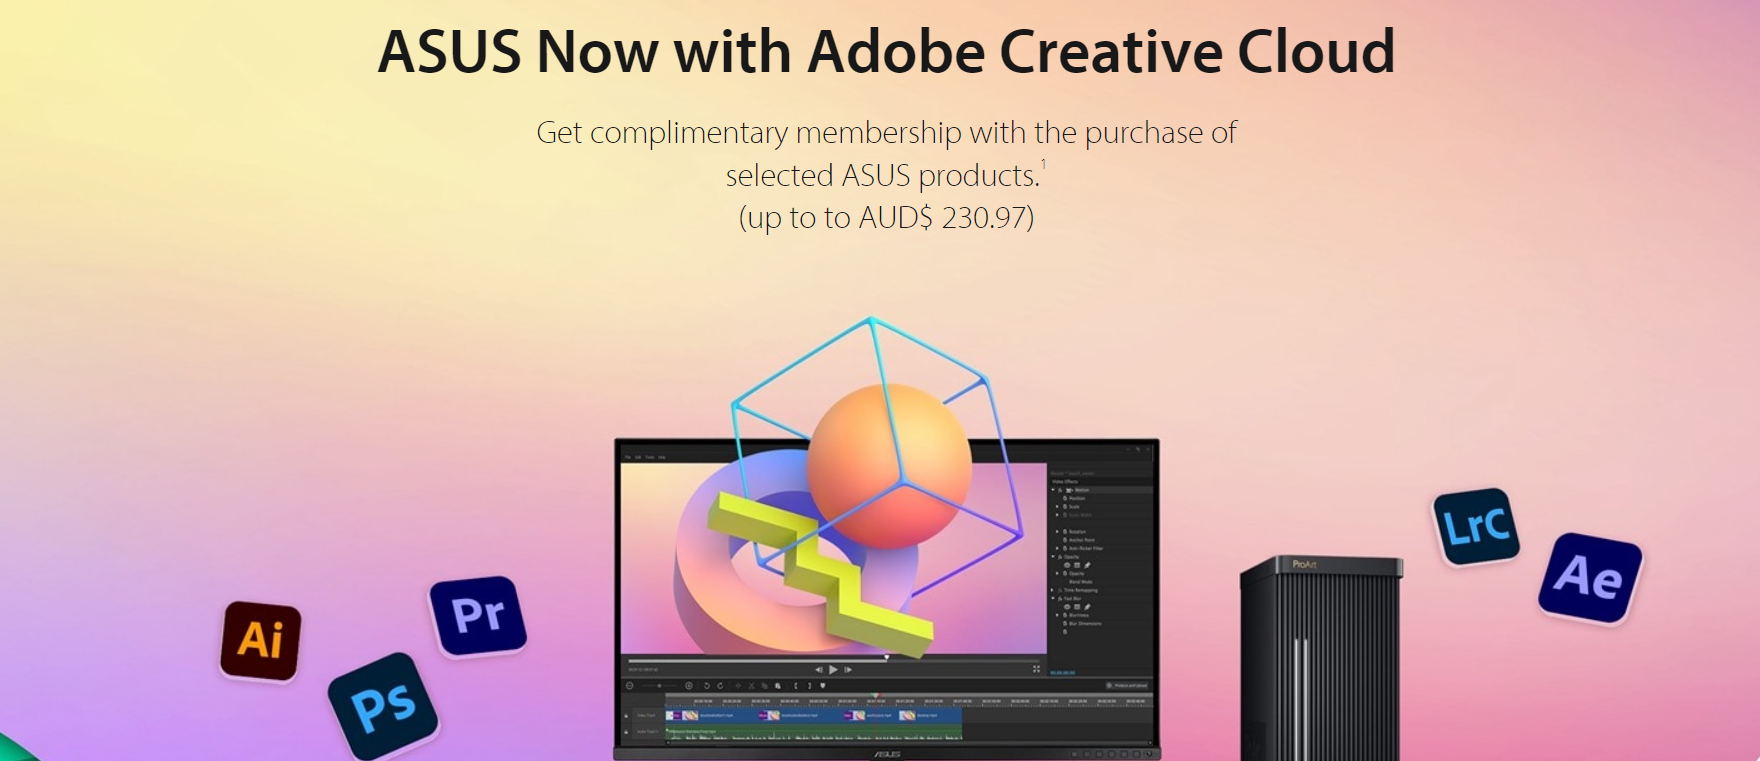 3 Years Warranty & 3 months FREE Adobe Creative Cloud(worth Up to $231) with selected ASUS products